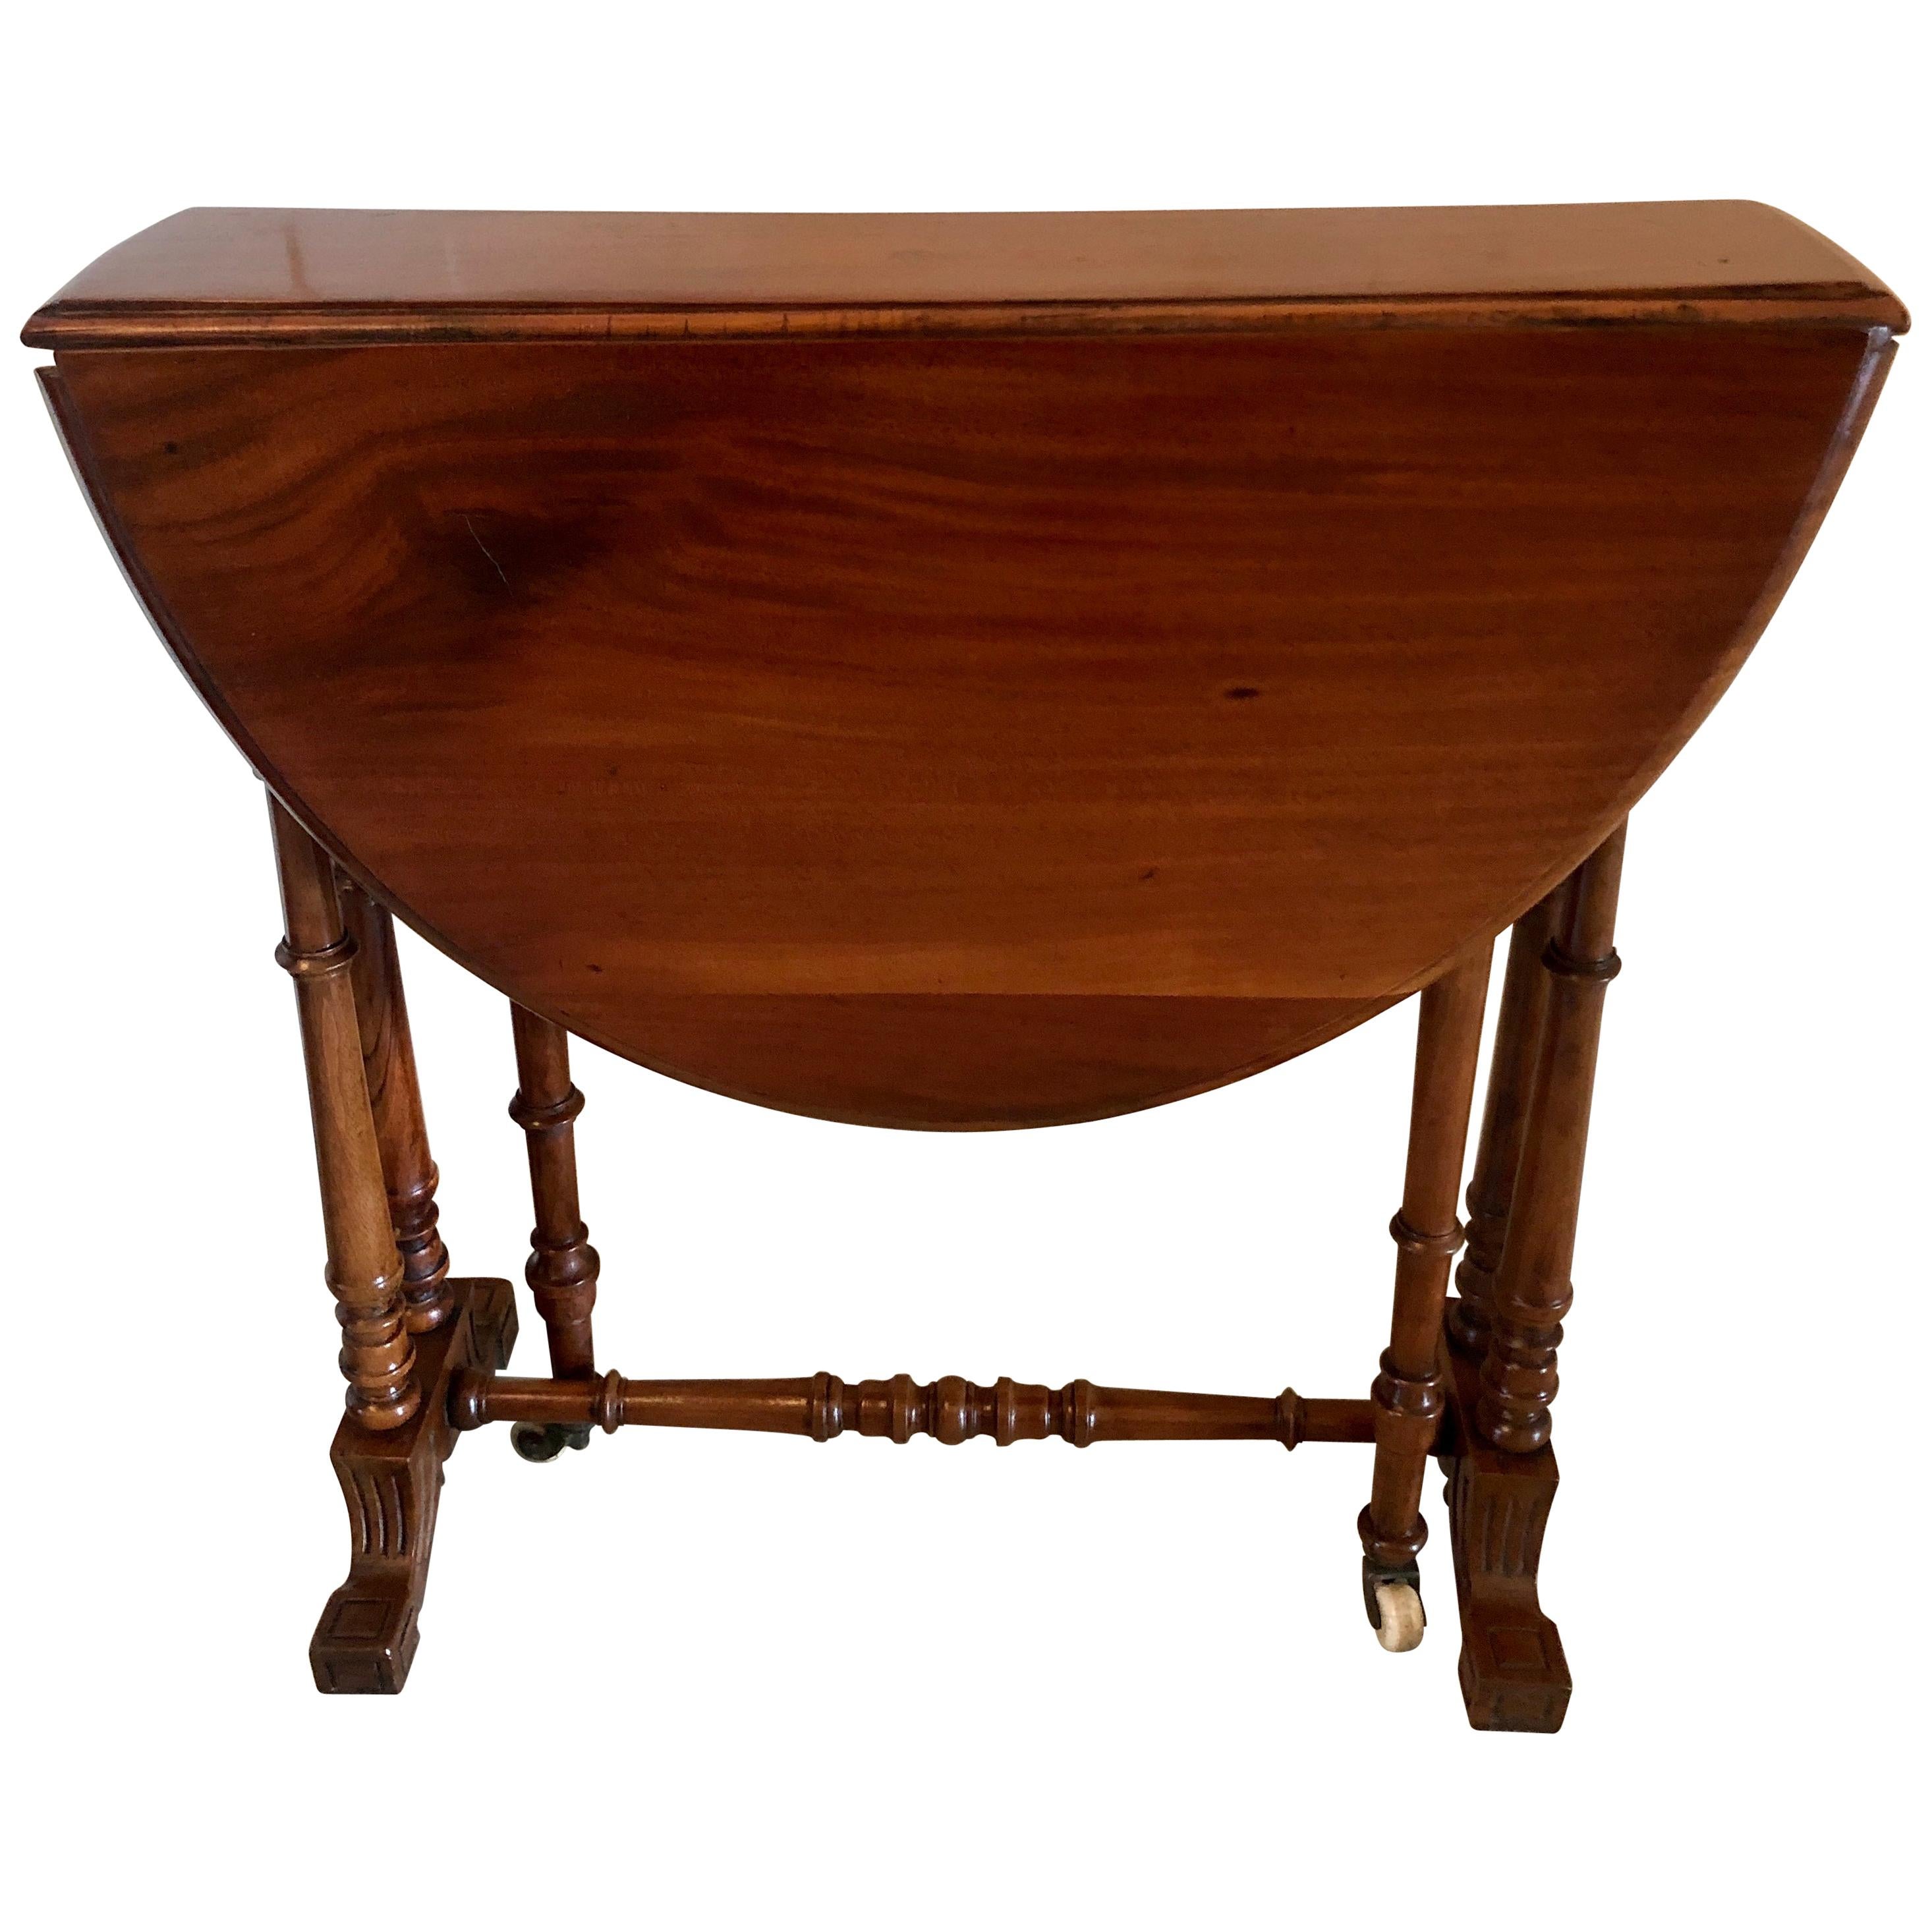 Antique Small Victorian Walnut Drop-Leaf Sutherland Table